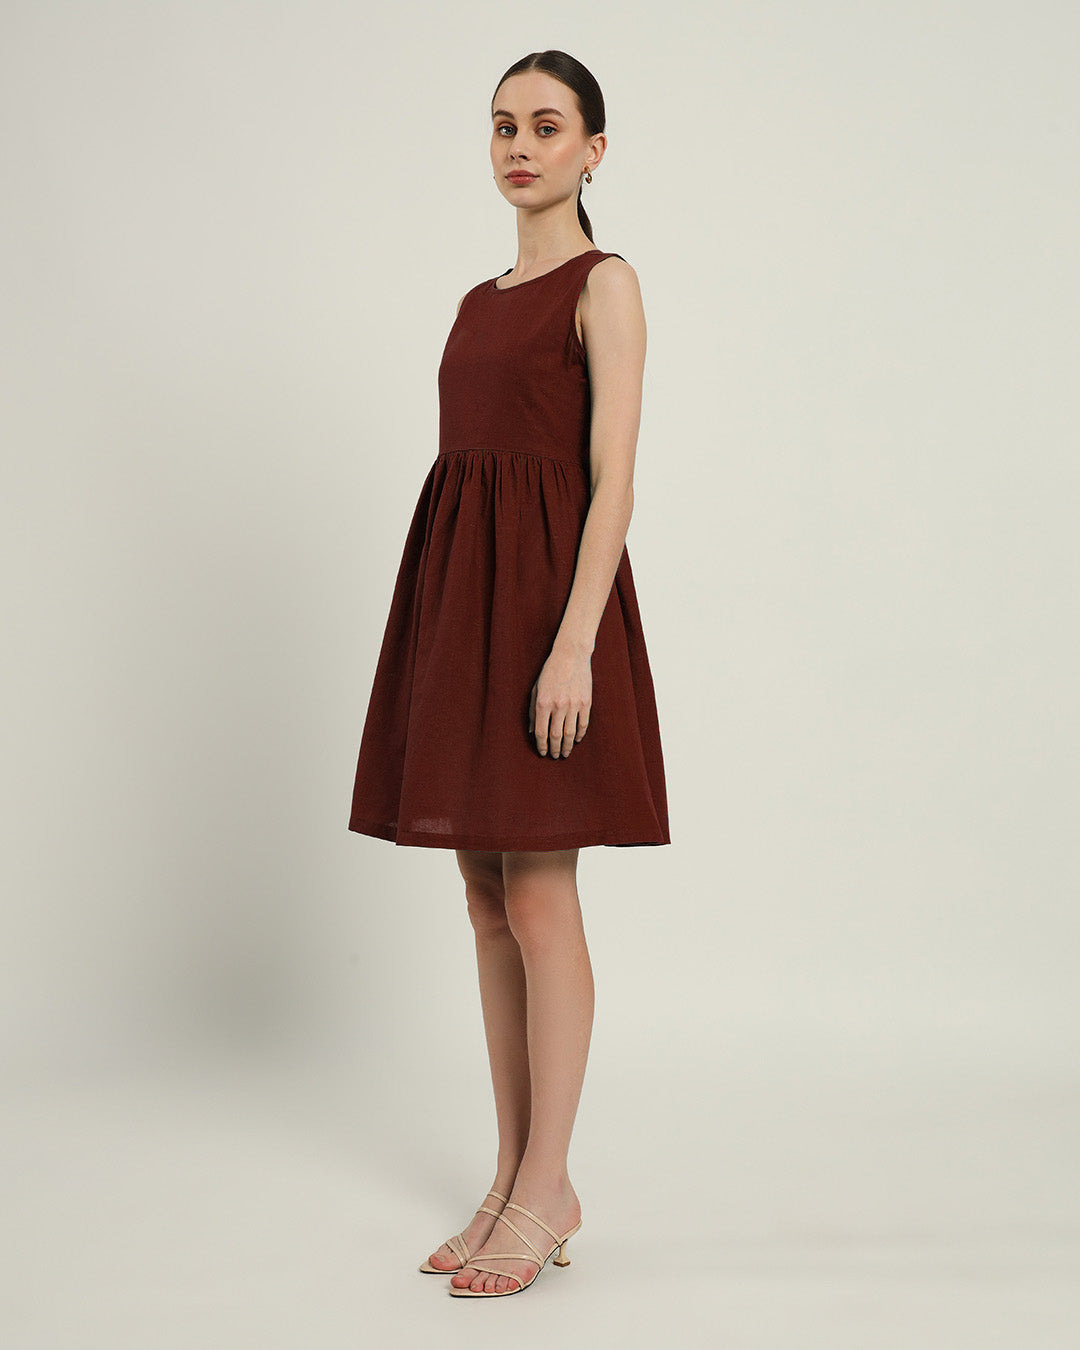 The Chania Rouge Cotton Dress